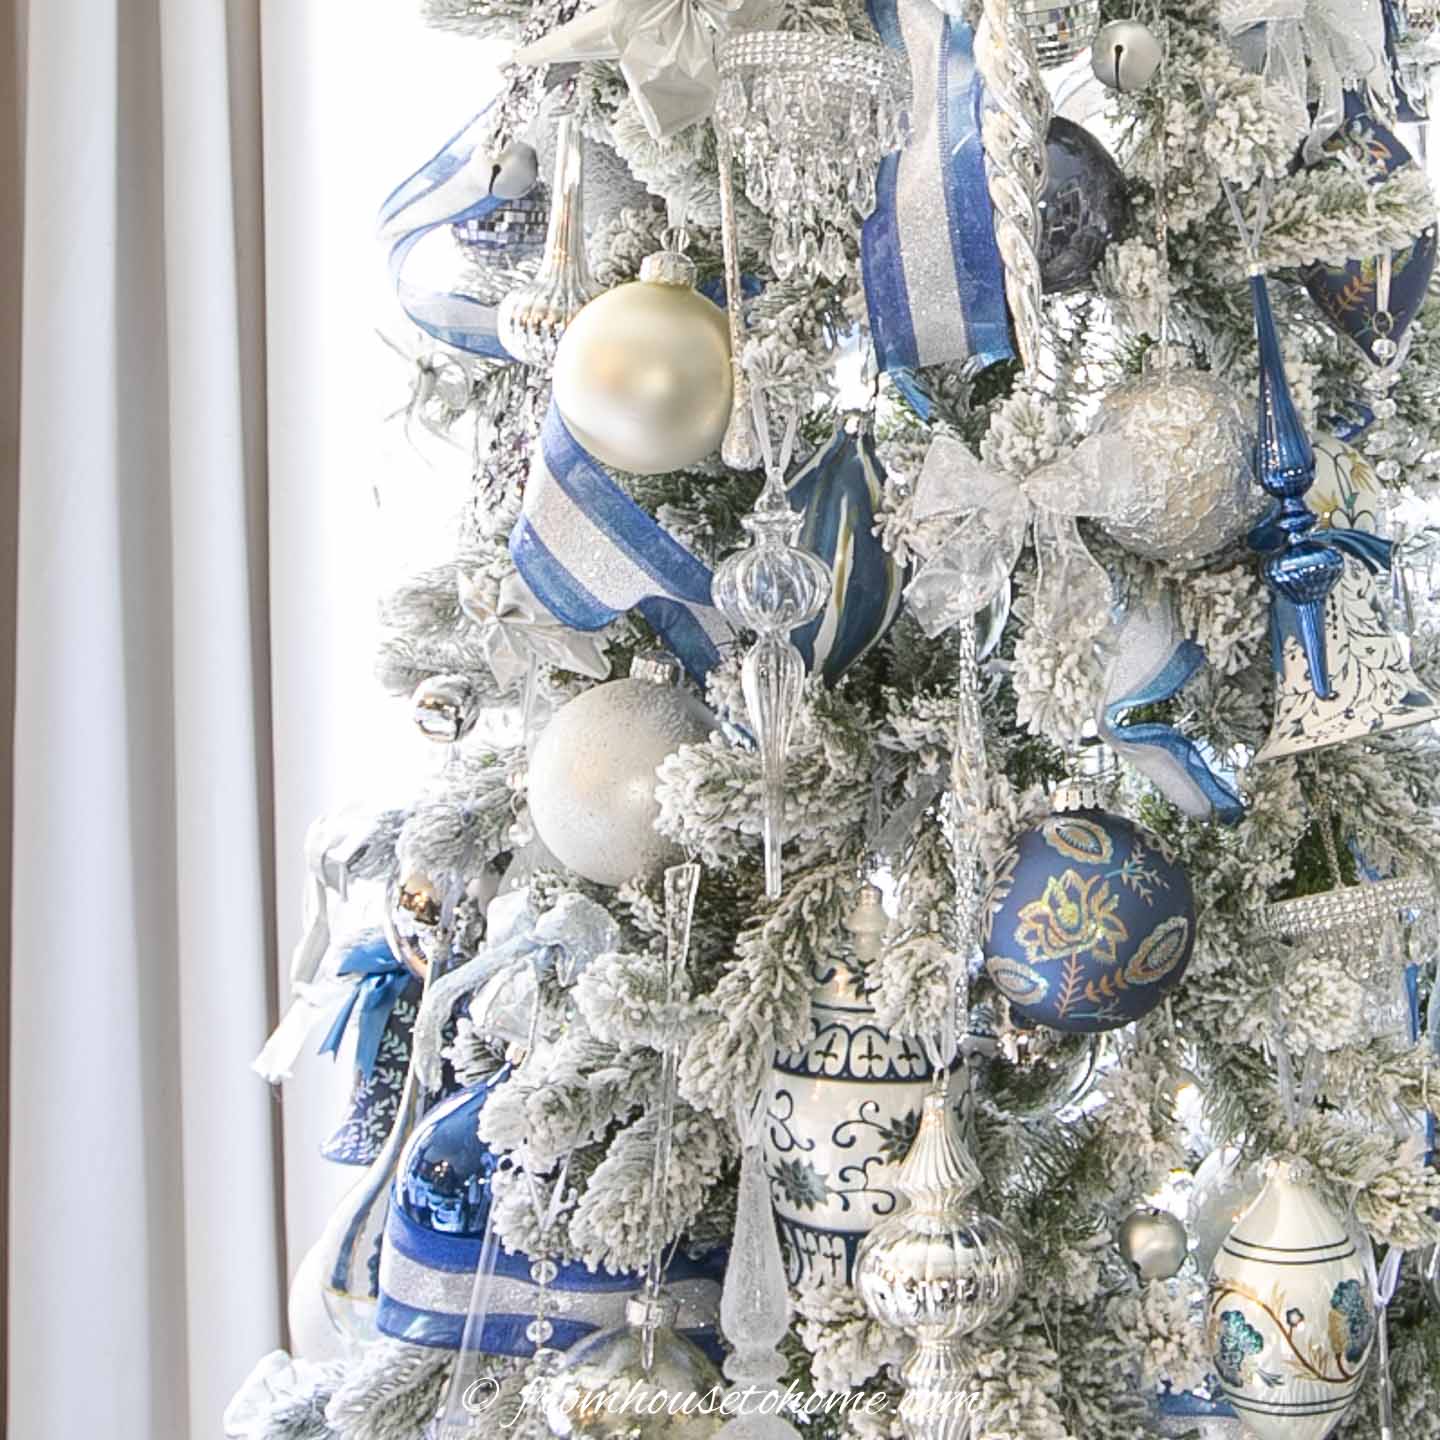 Winter Wonderland: White Christmas Tree with Blue Accents插图